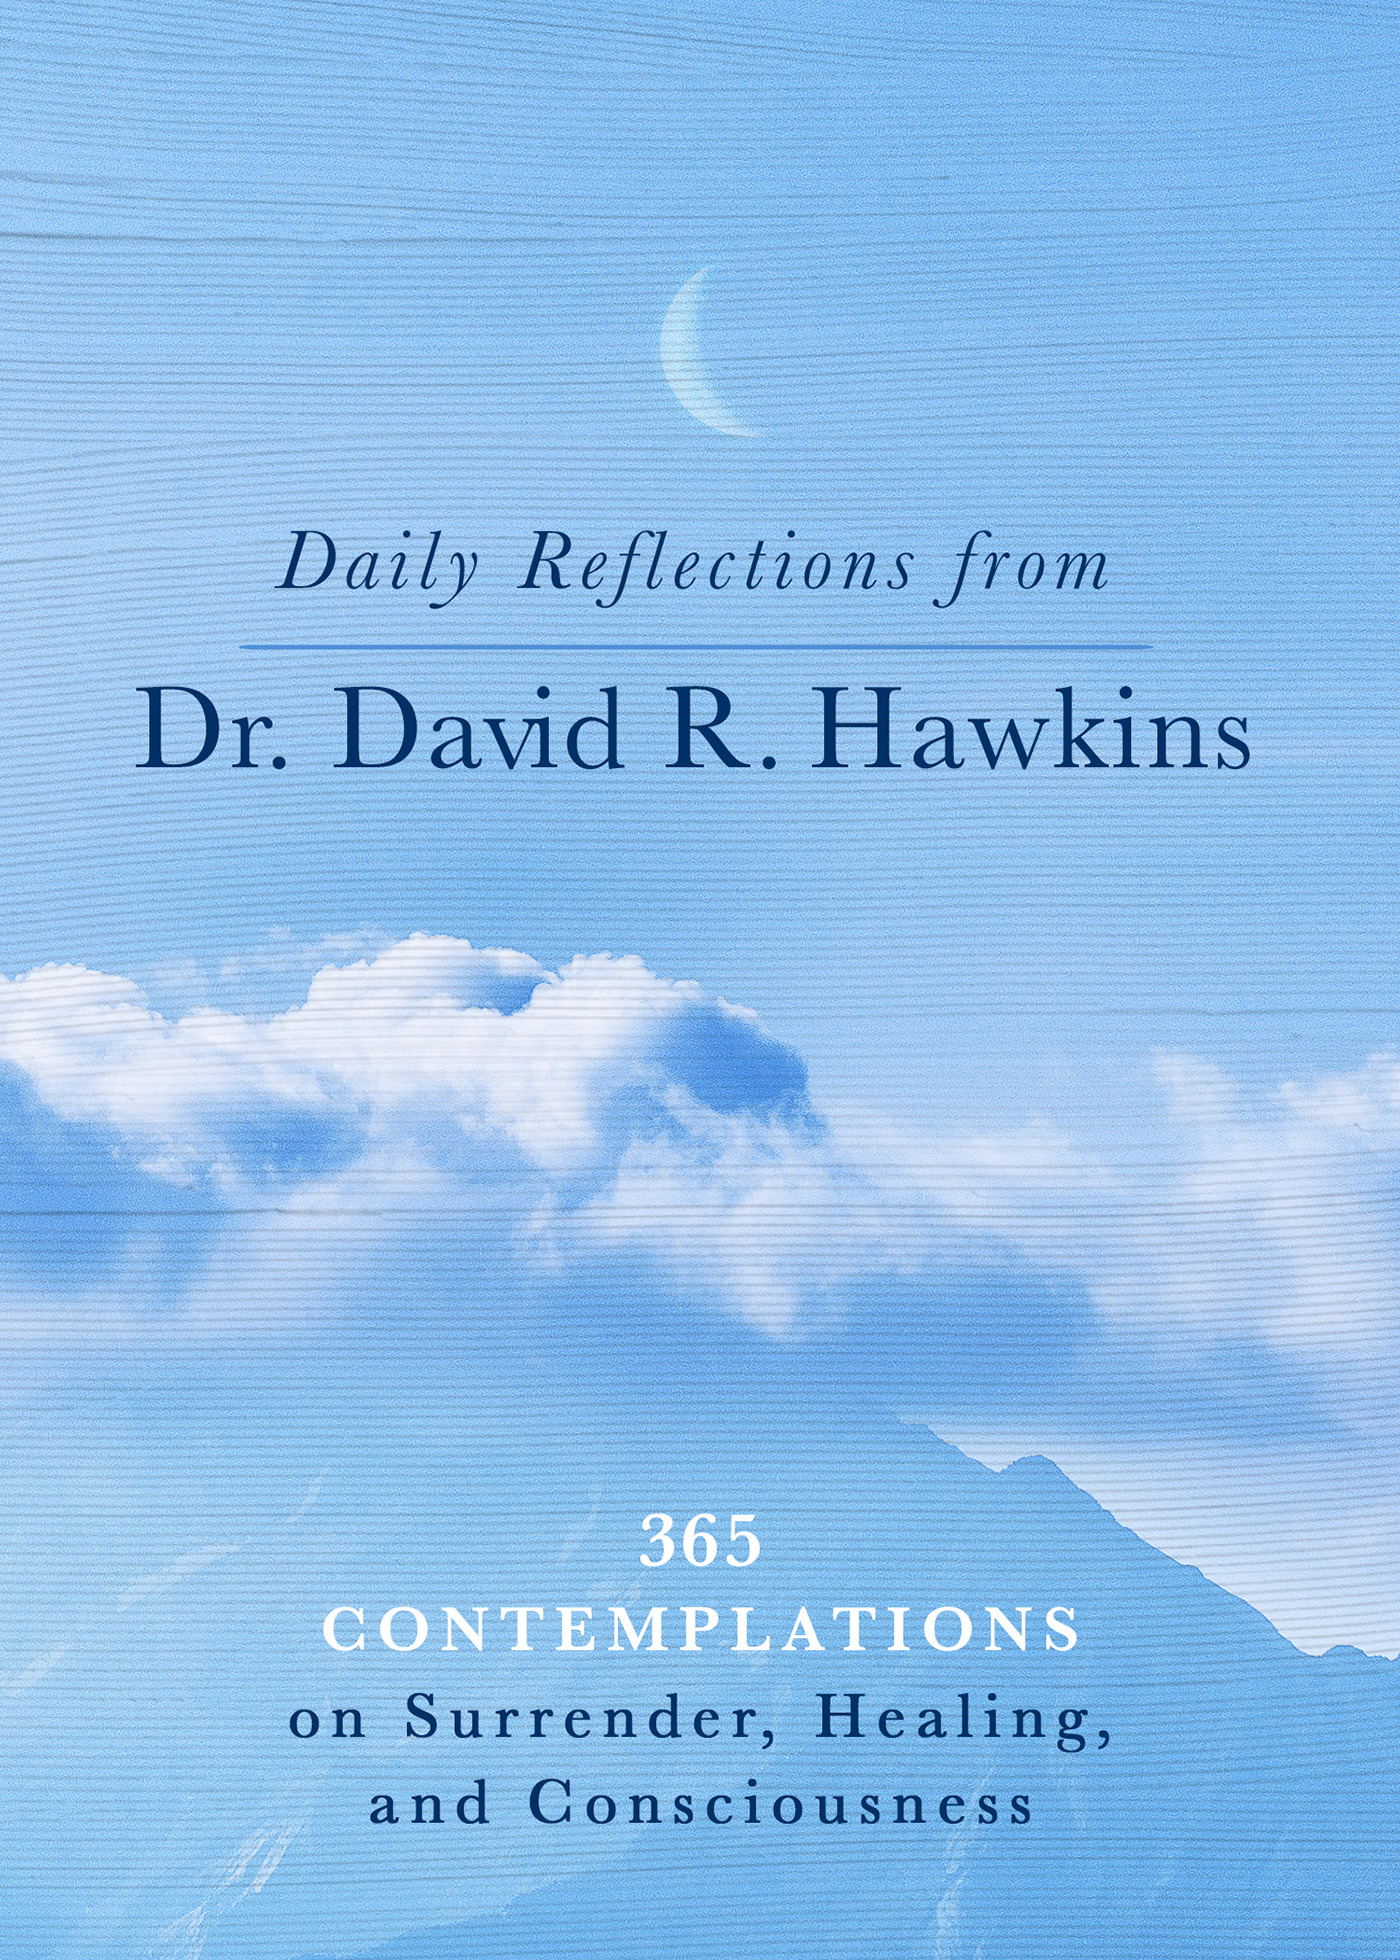 Daily Reflections from Dr. David R. Hawkins : 365 Contemplations on Surrender, Healing, and Consciousness | Psychology & Self-Improvement